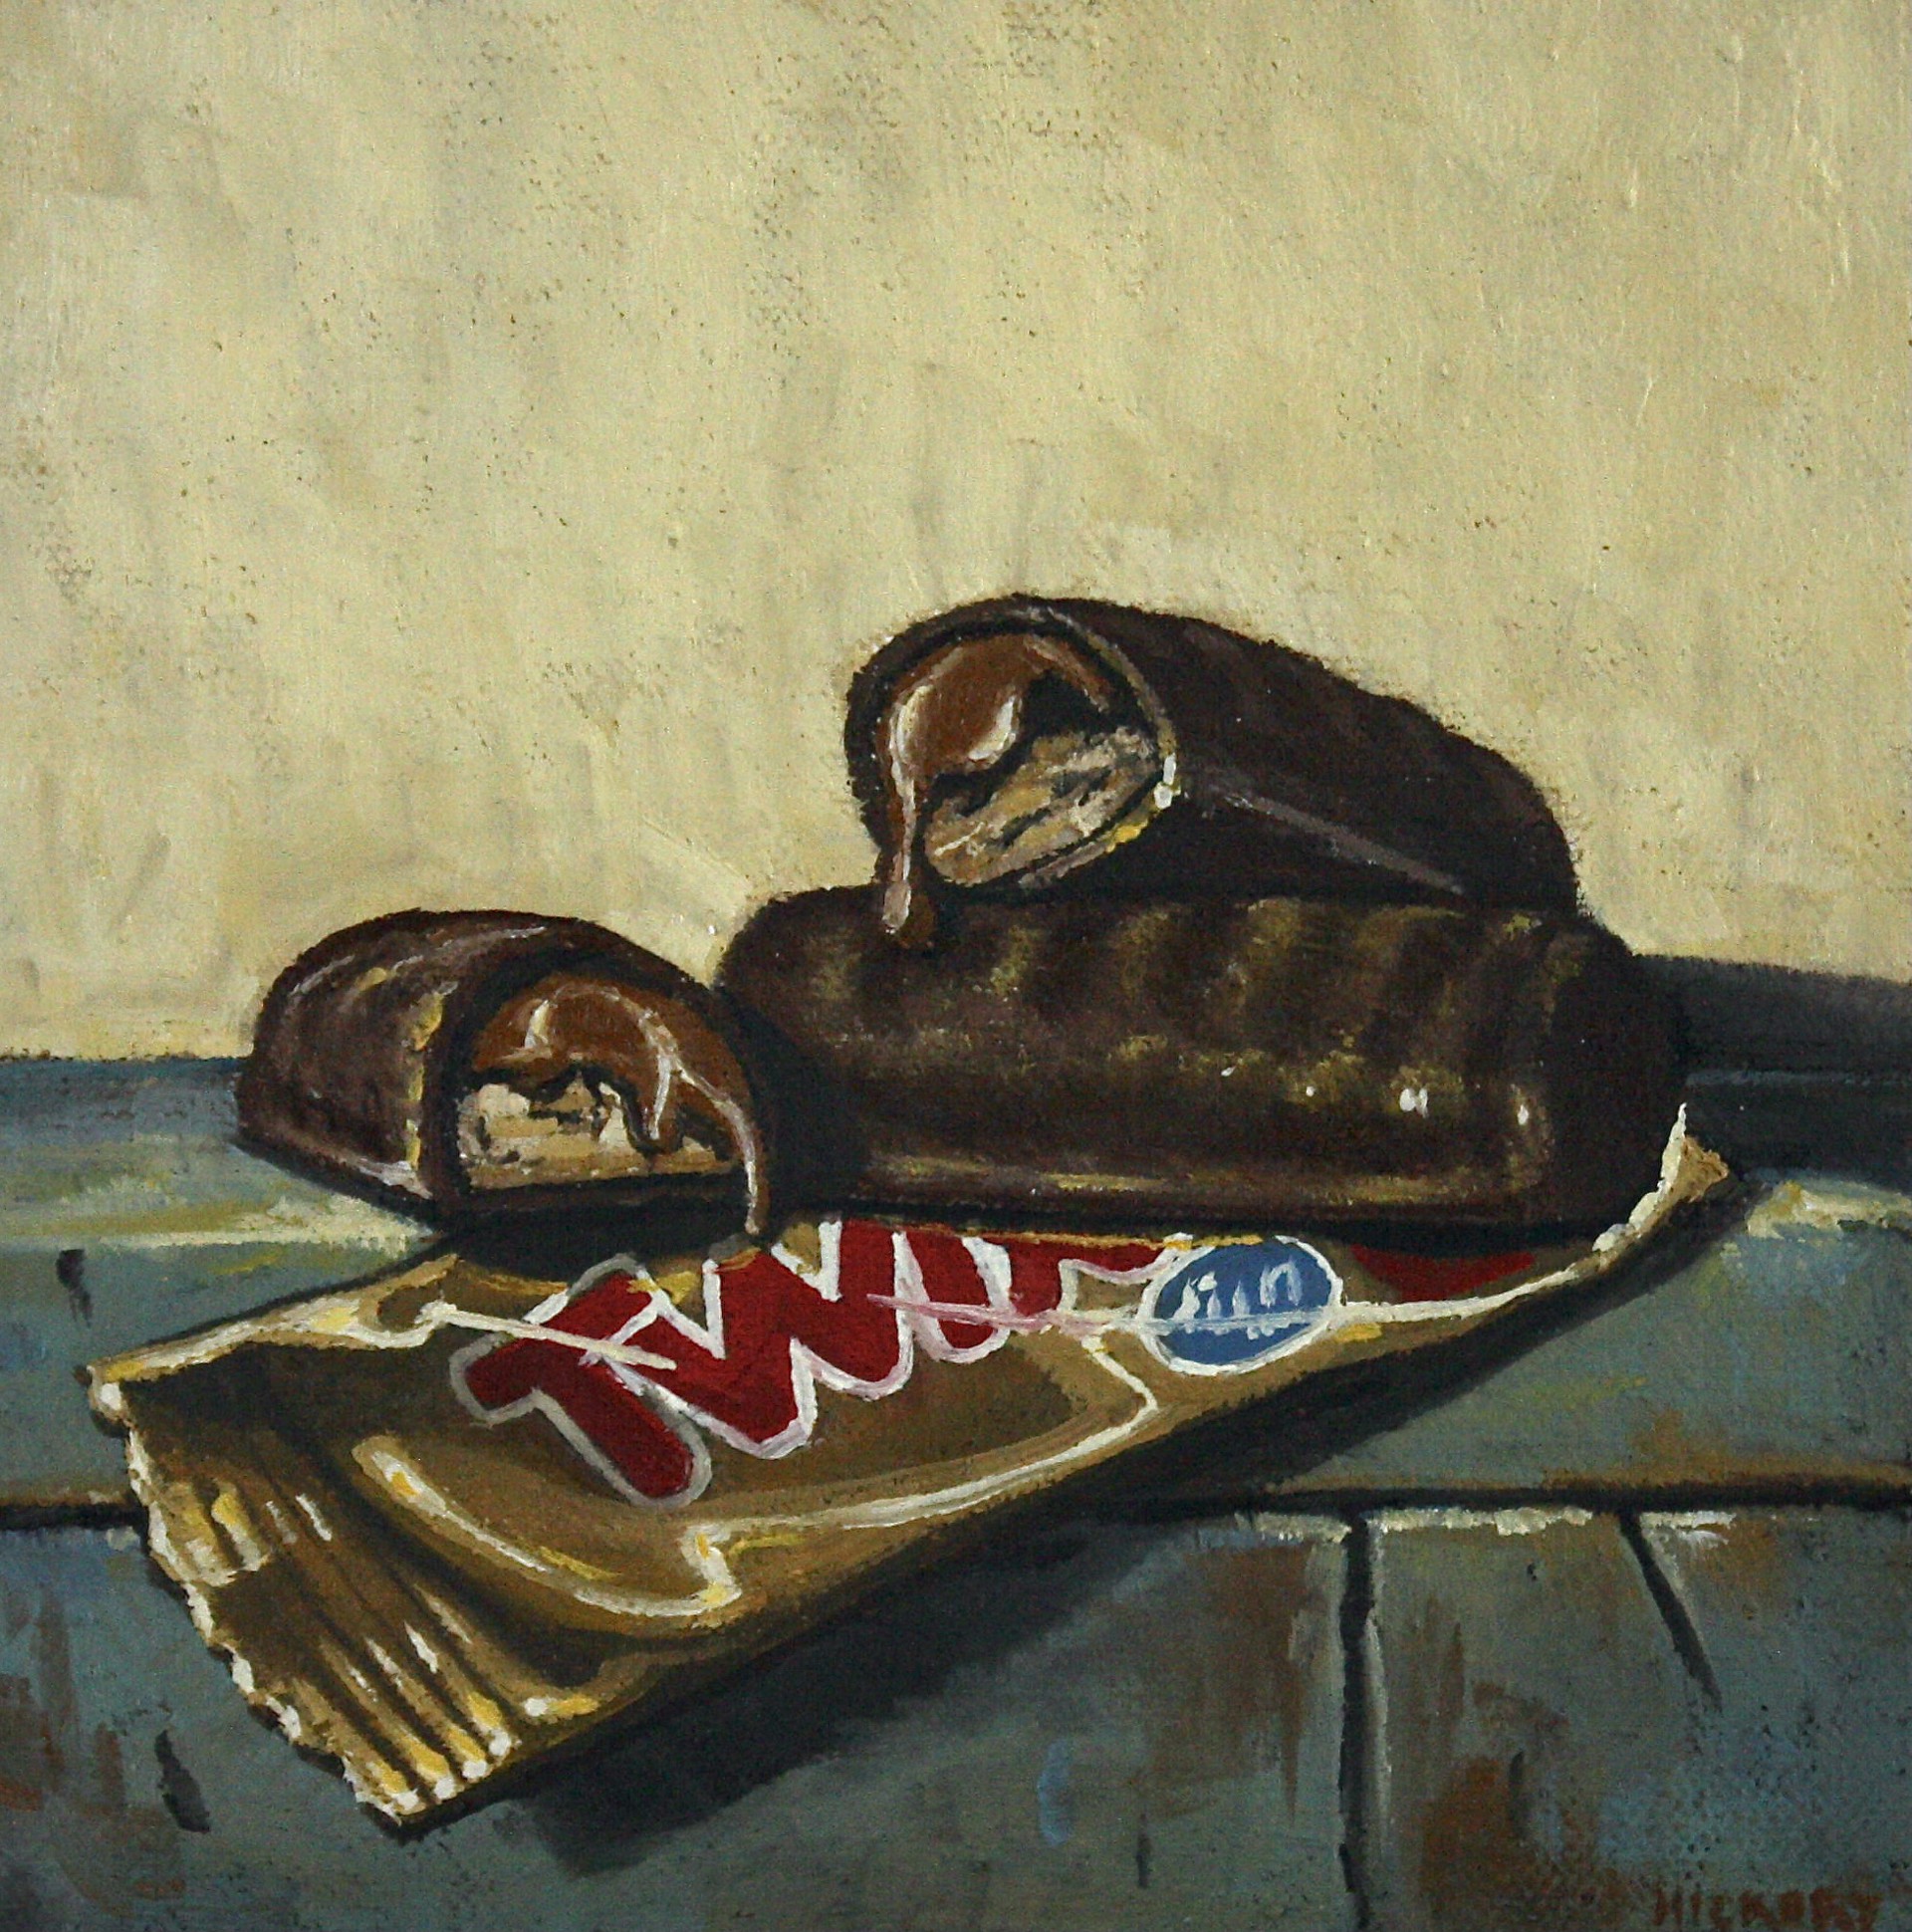 Twix by Hickory Mertsching